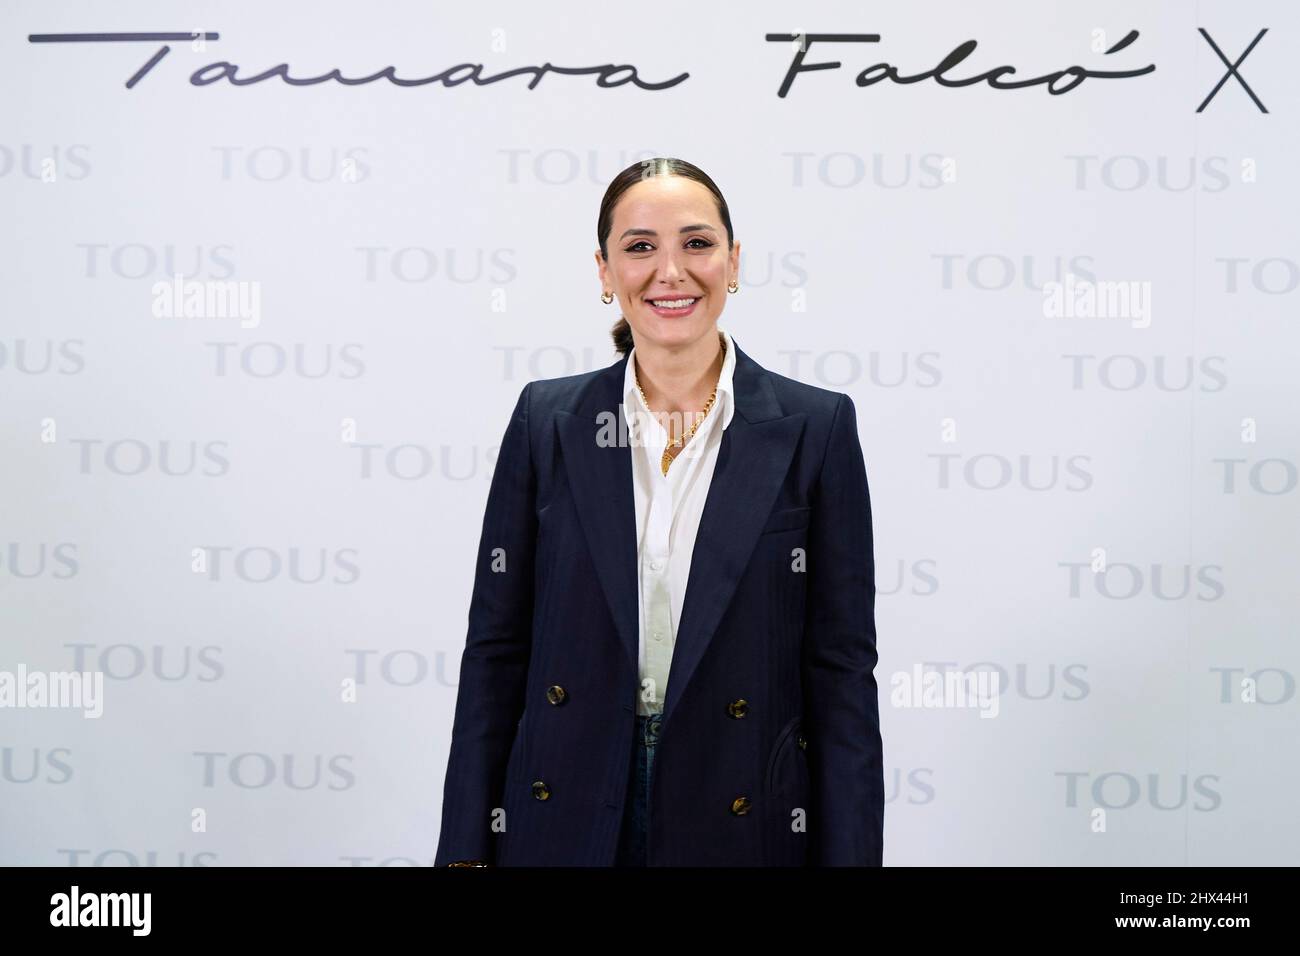 Madrid. Spain. 20220309,  Tamara Falco presents the new Tamara Falco x TOUS collection  at the Tous store on March 9, 2022 in Madrid, Spain Stock Photo